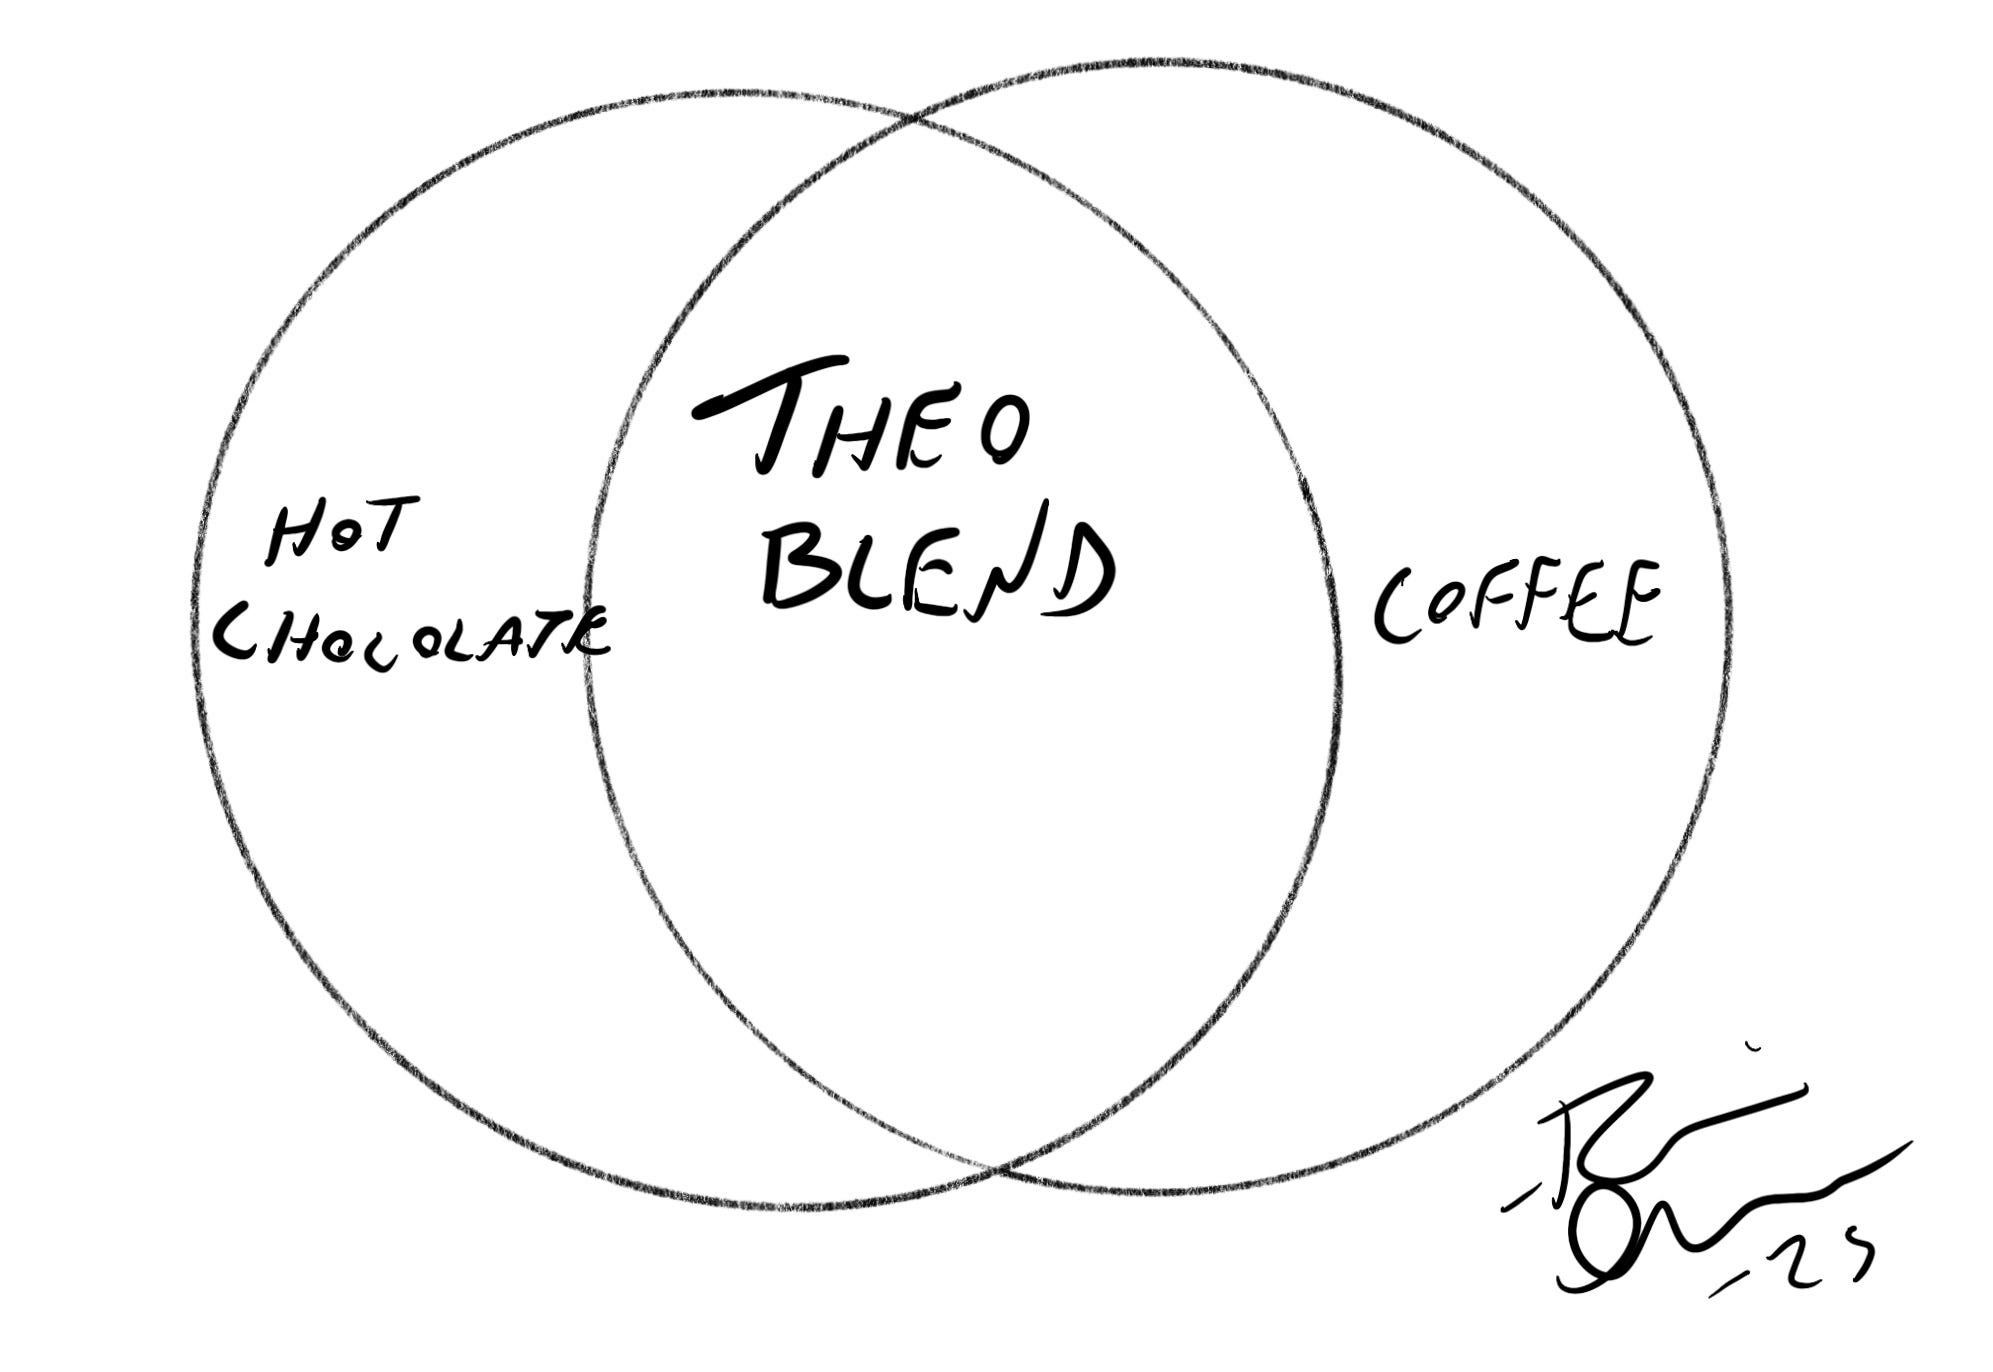 Venn diagram showing Theo Blend taking up much of the hot chocolate and coffee circles.